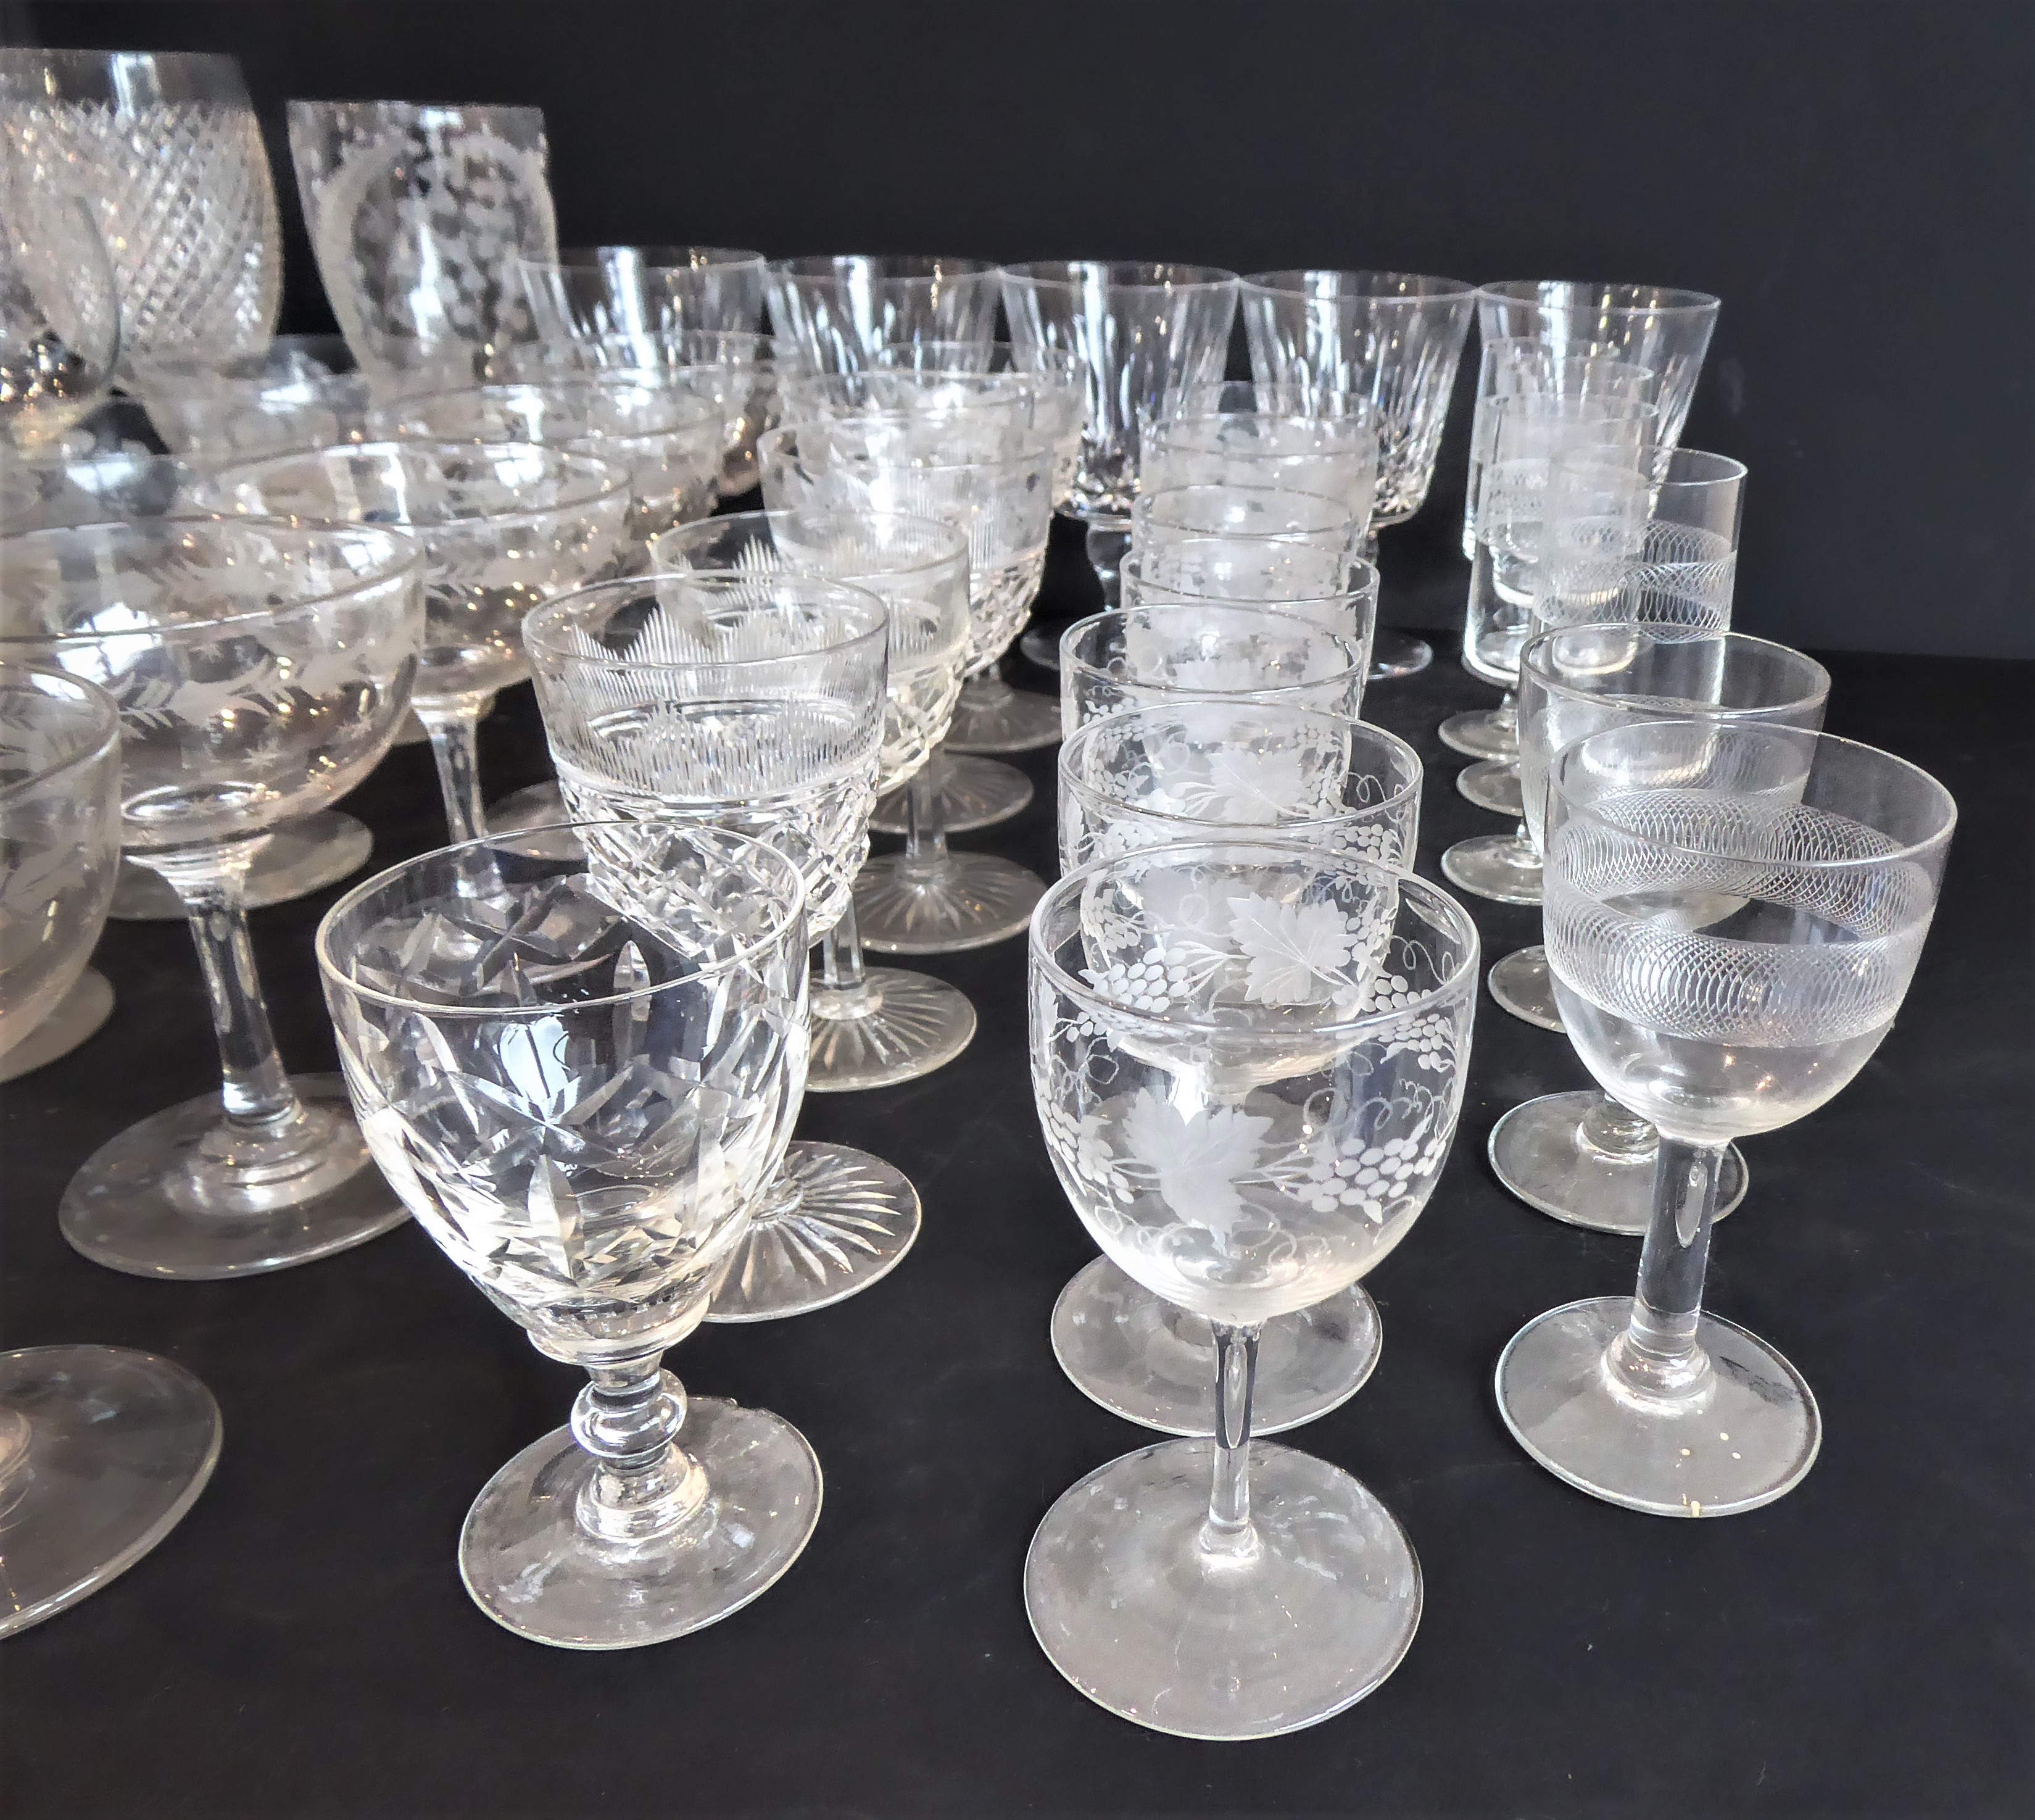 Five trays of various fine quality drinking glasses to include: hocks, hobnail-cut flutes, wines, - Image 4 of 5